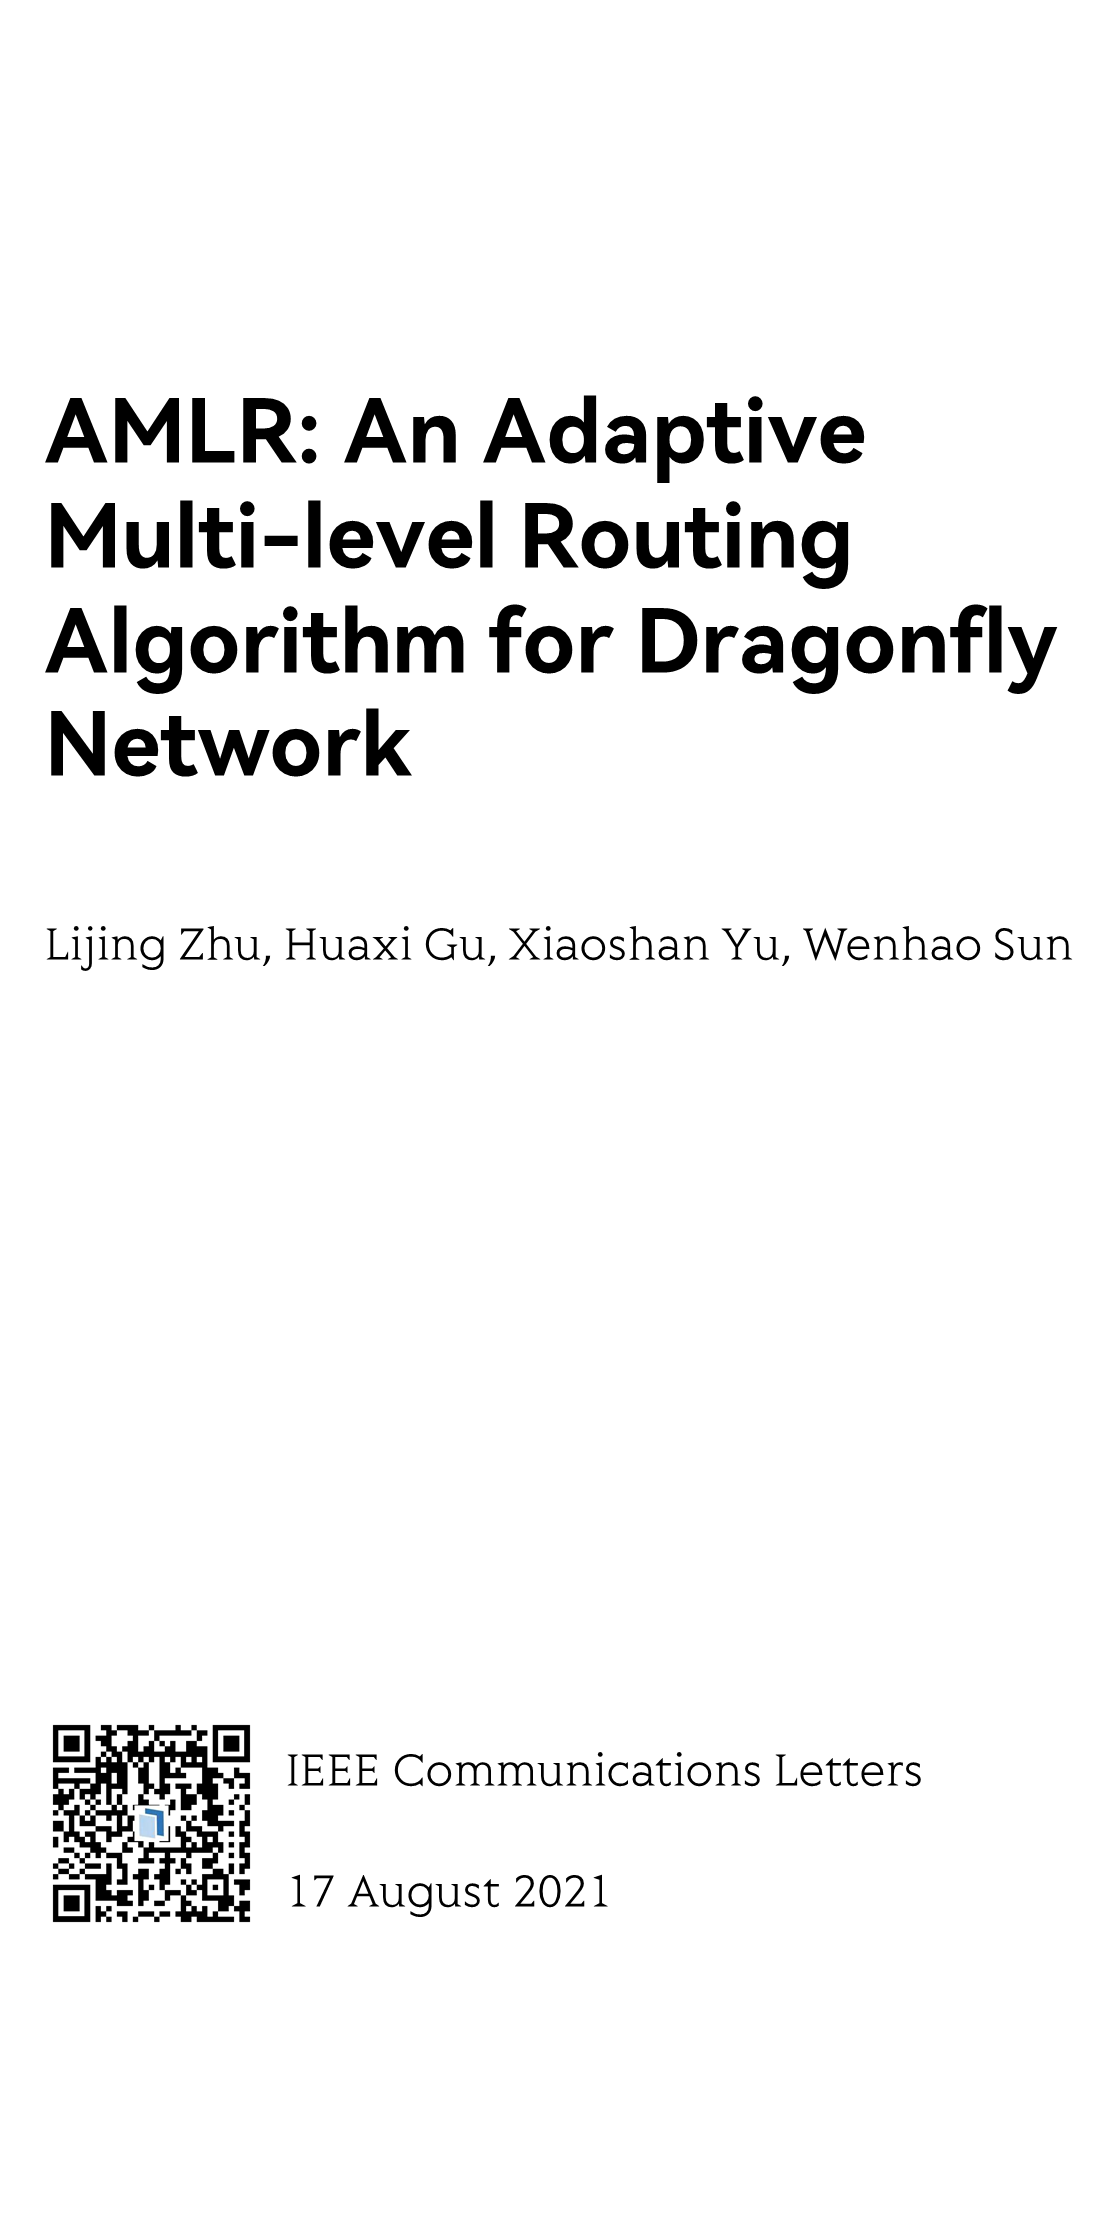 AMLR: An Adaptive Multi-level Routing Algorithm for Dragonfly Network_1